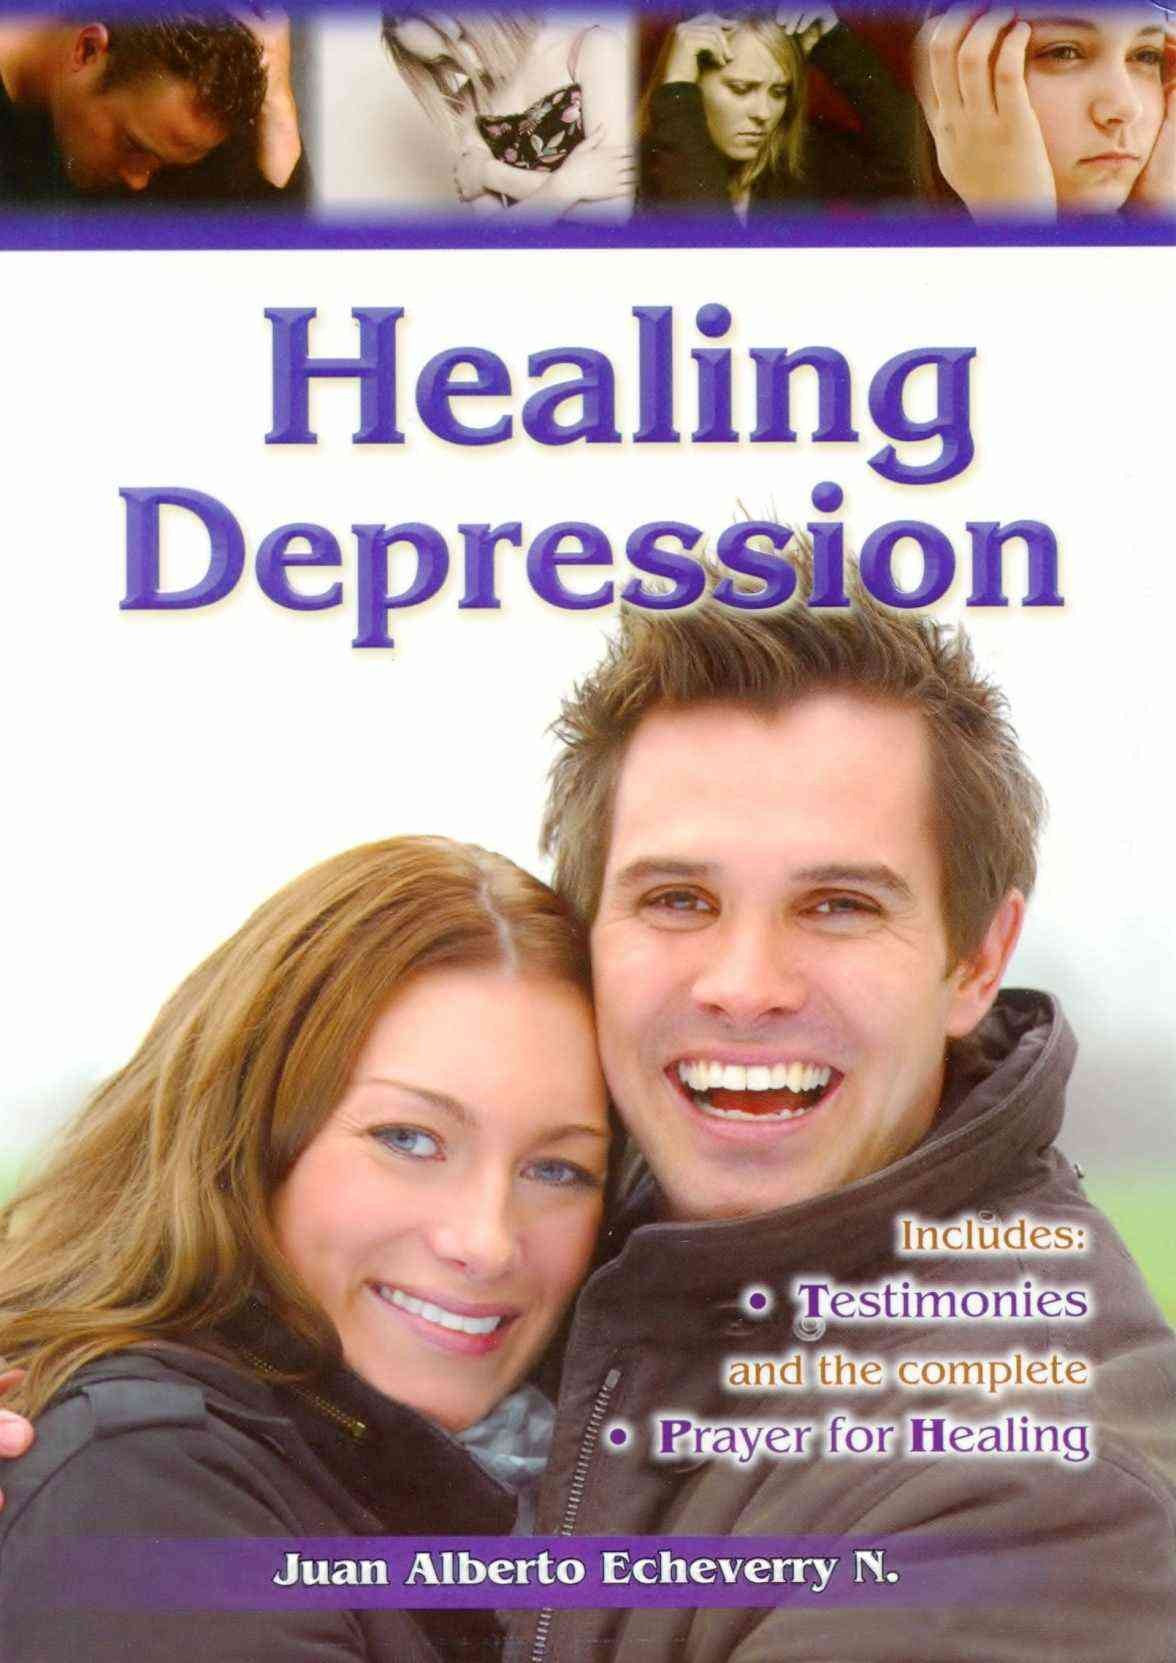 In Santa María del Monte, our goal is to evangelize and our products help us to do so, that is why we present you this book that it shows you that it is possible to recover from depression, as long as you take the path of spiritual healing to restore the soul . Find it in our books section and help us carry the message of Christ.  Our products speak for themselves